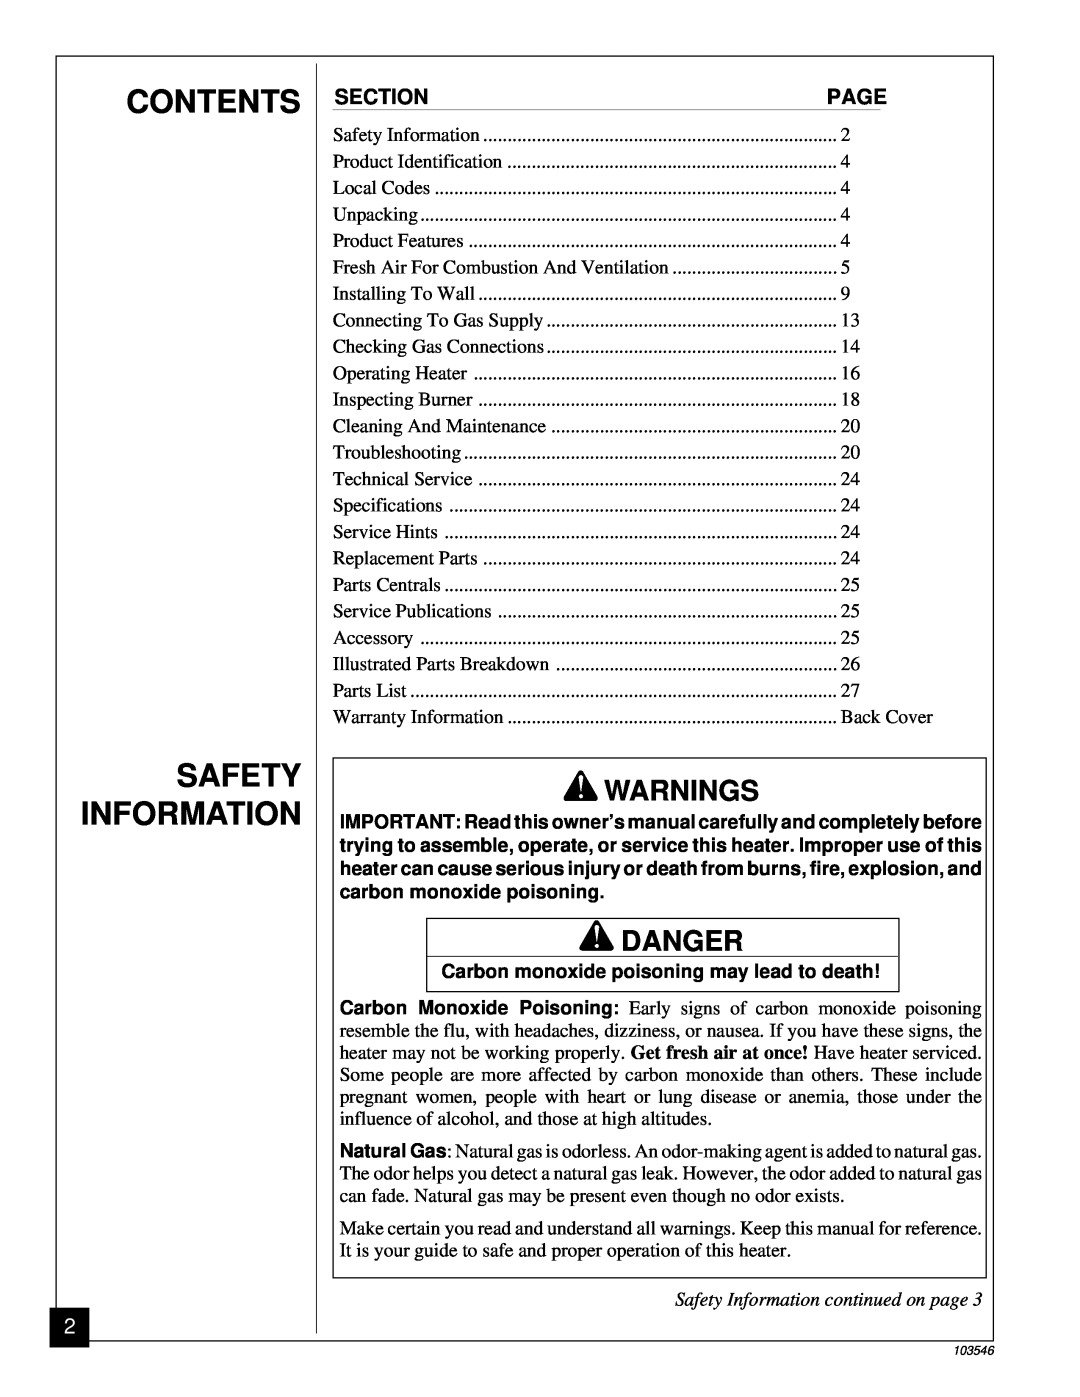 Desa CGN6L, CGN10L installation manual Contents, Safety, Information, Warnings 